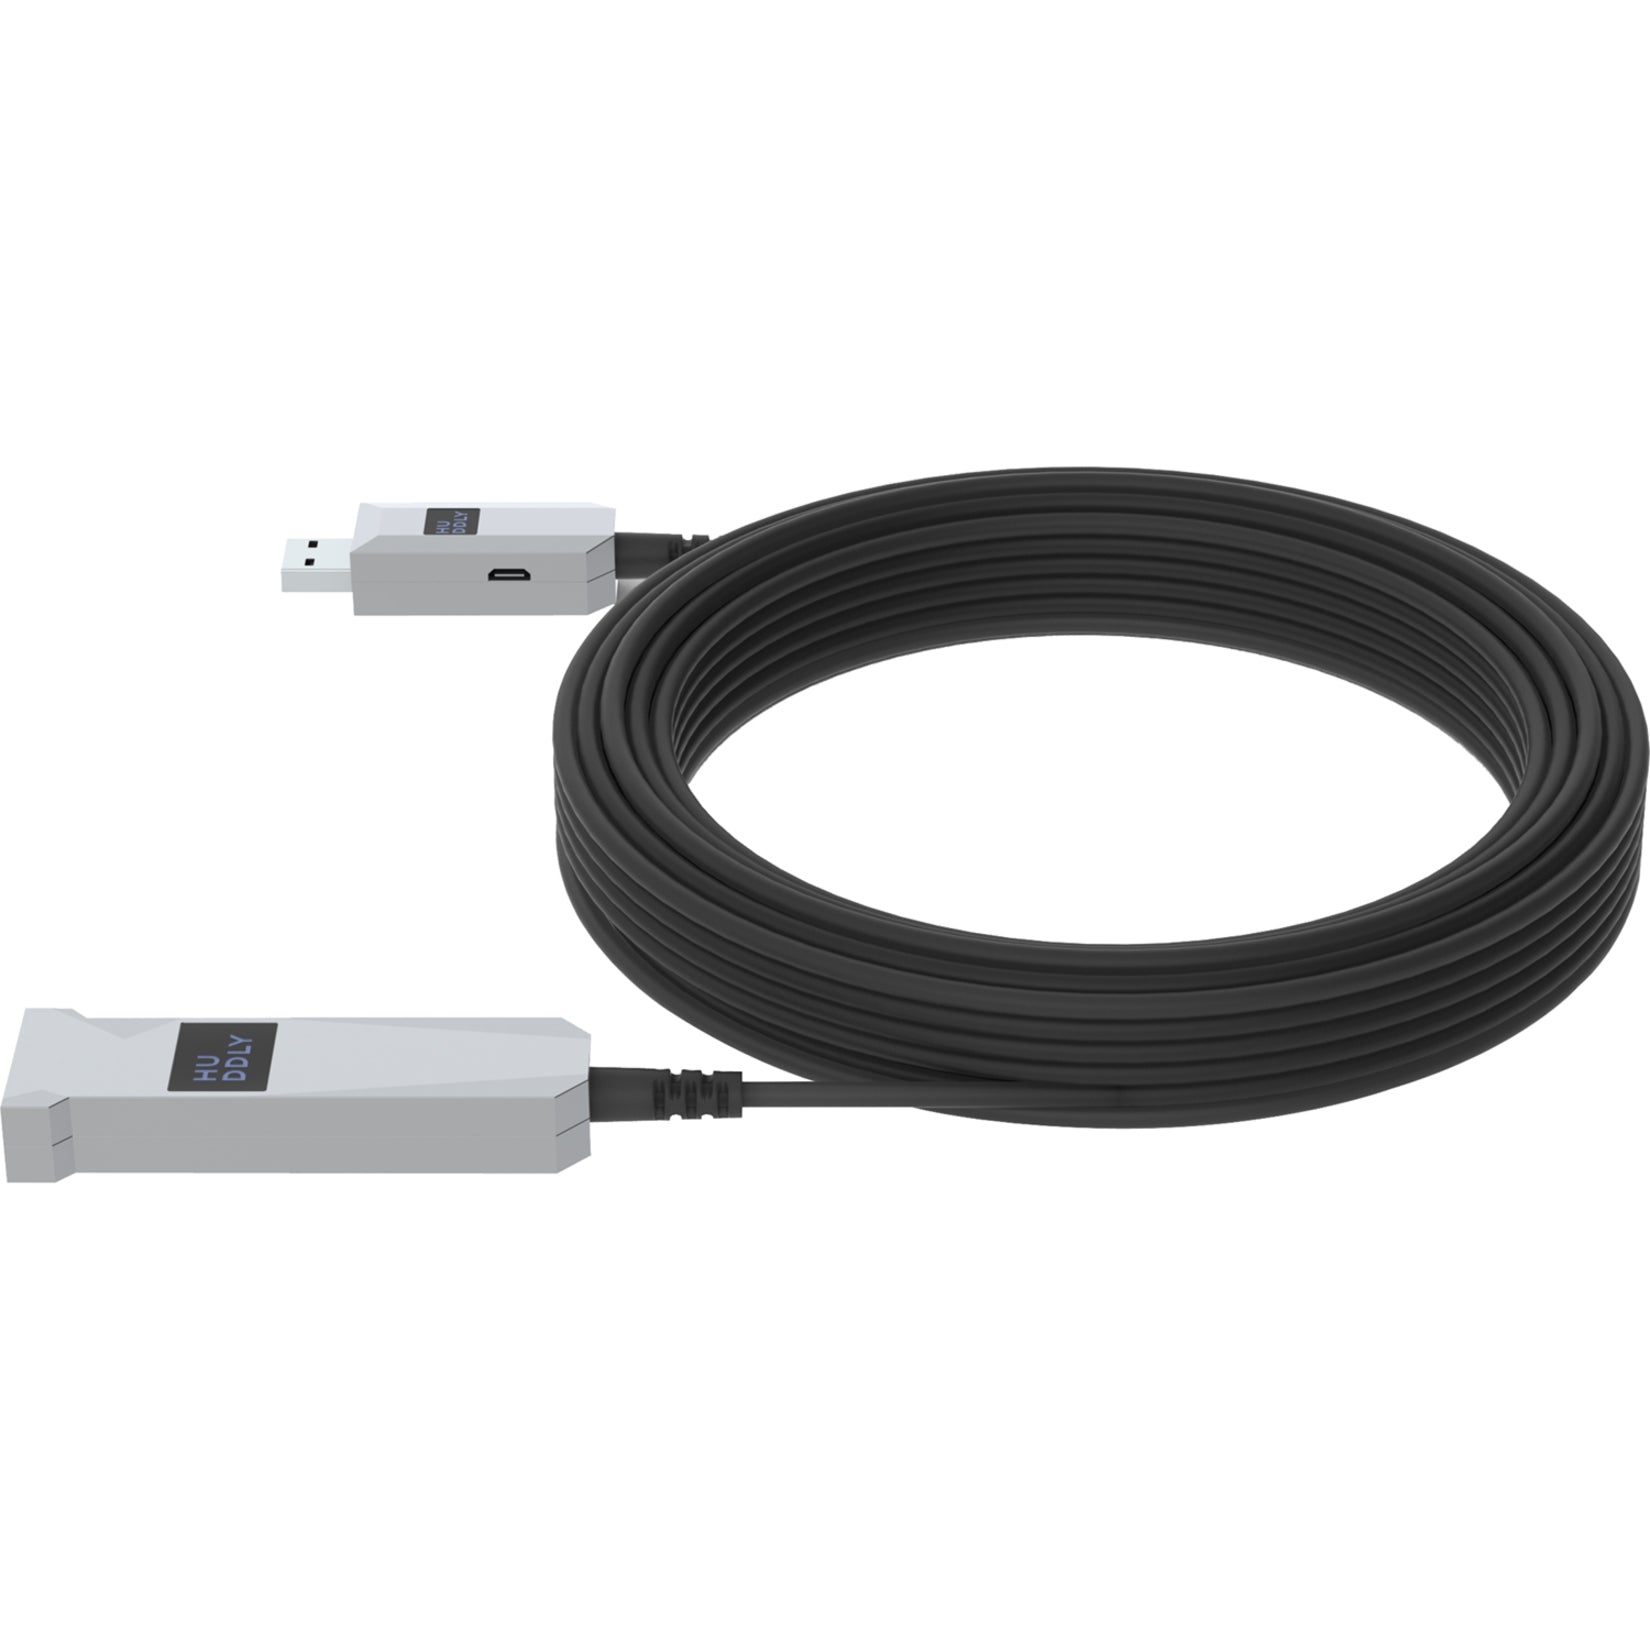 Huddly 7090043790450 USB AOC Data Transfer Cable, 32.81 ft Extension Cable